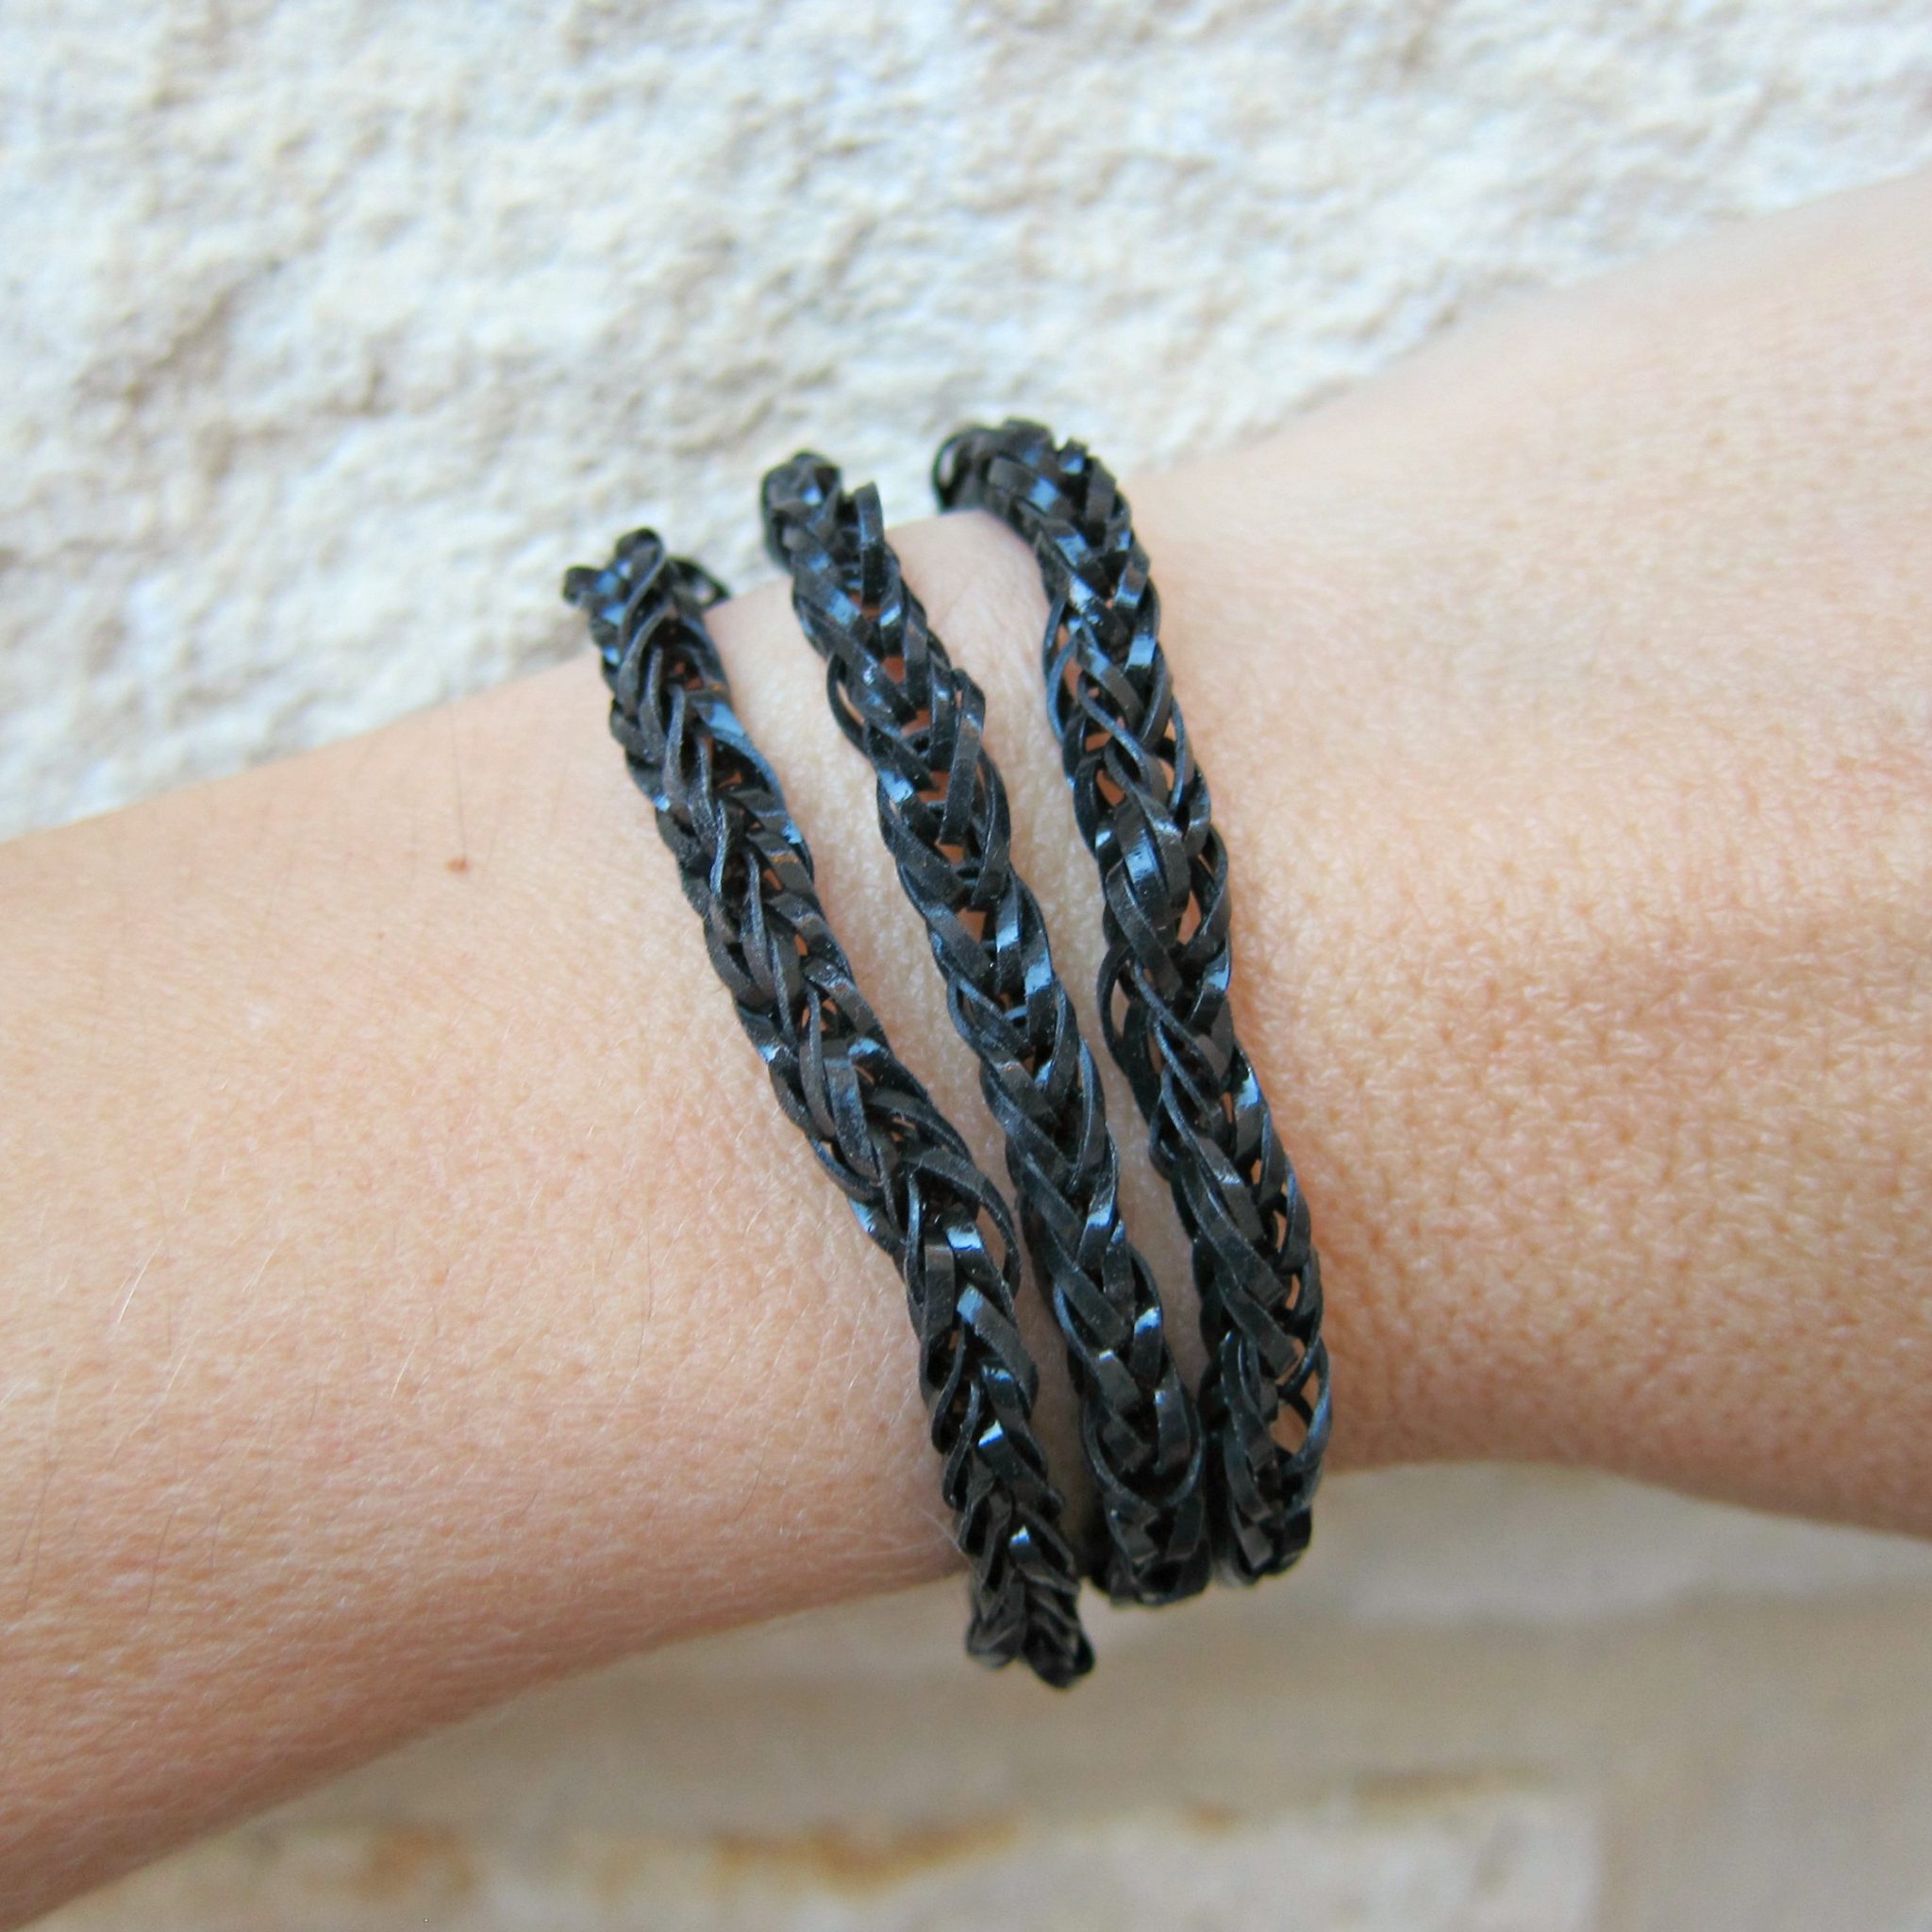 Tutorial: Make Rubber Band Jewelry Without a Loom » Dollar Store Crafts